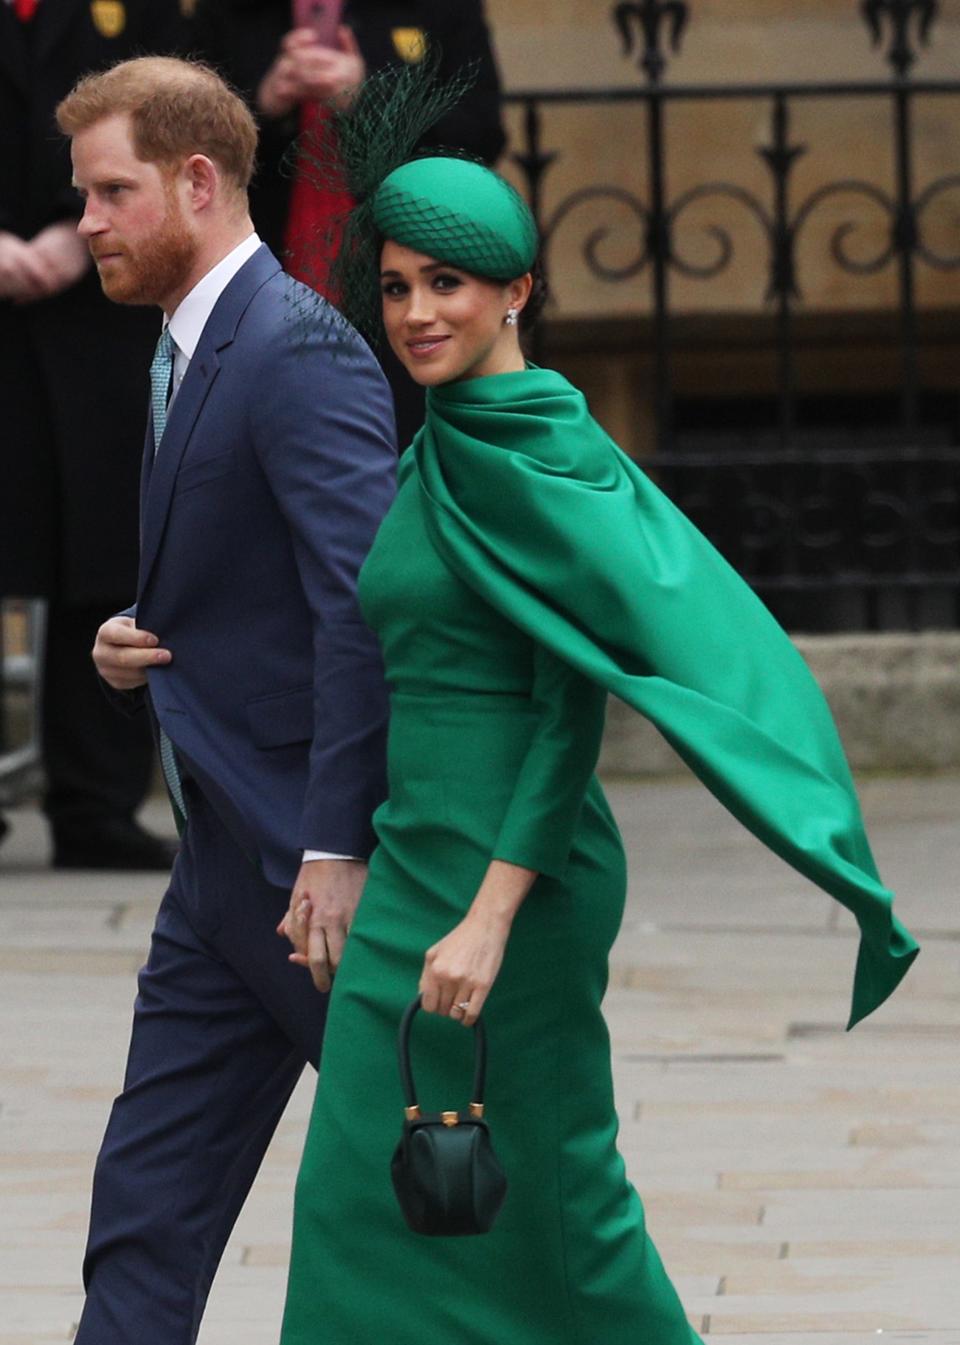 Prince Harry and Meghan Markle arrive to attend the annual Commonwealth Day Service at Westminster Abbey on March 9, 2020 in London, England.